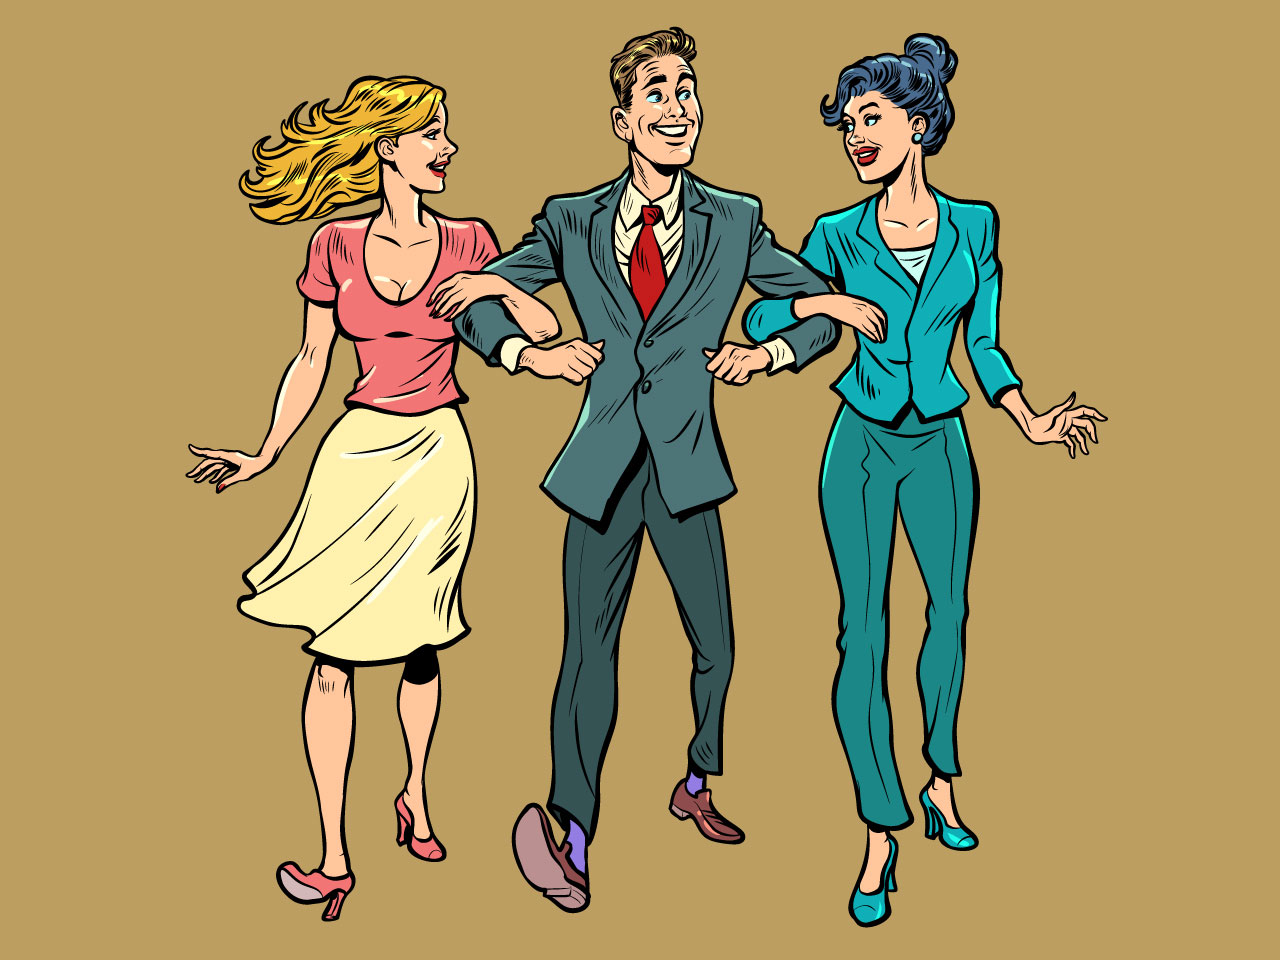 Date man with two girls unconventional marriage friends are walking cartoon image